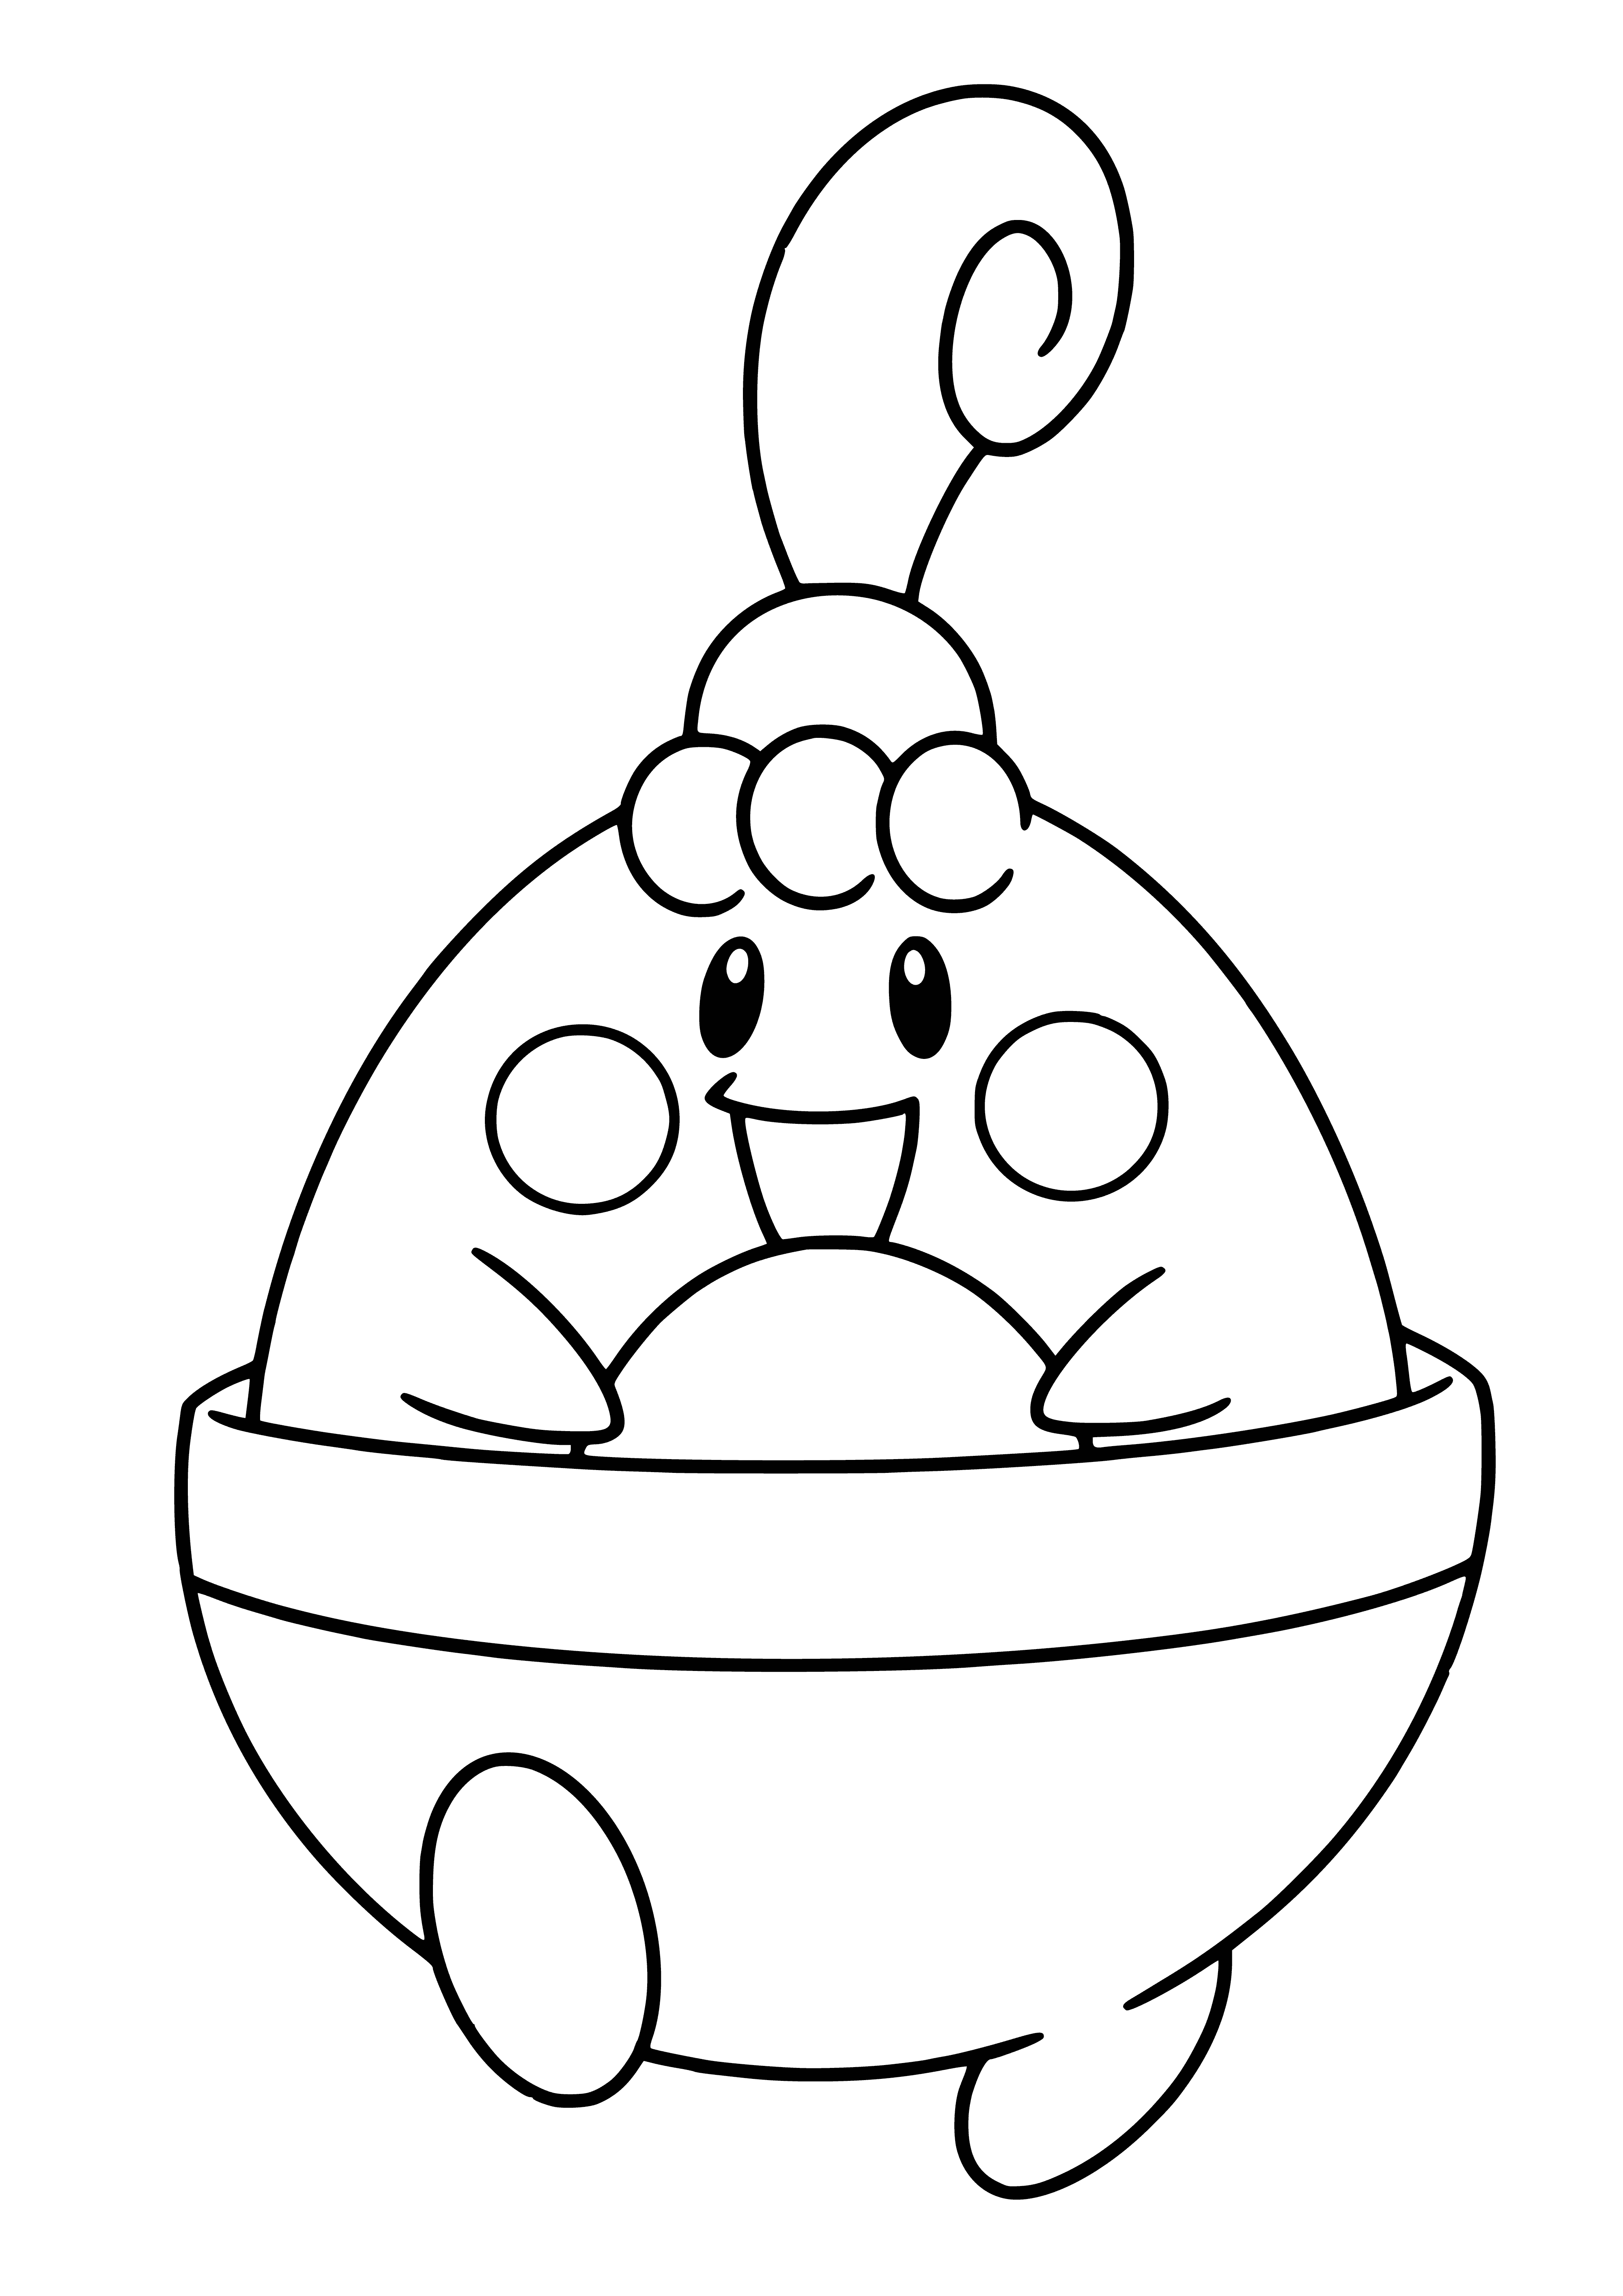 coloring page: A small, affectionate Pokemon, Happiny has a white, downy body & a "cape" of its eggshell. Enjoys being held & cuddled. #Pokemon